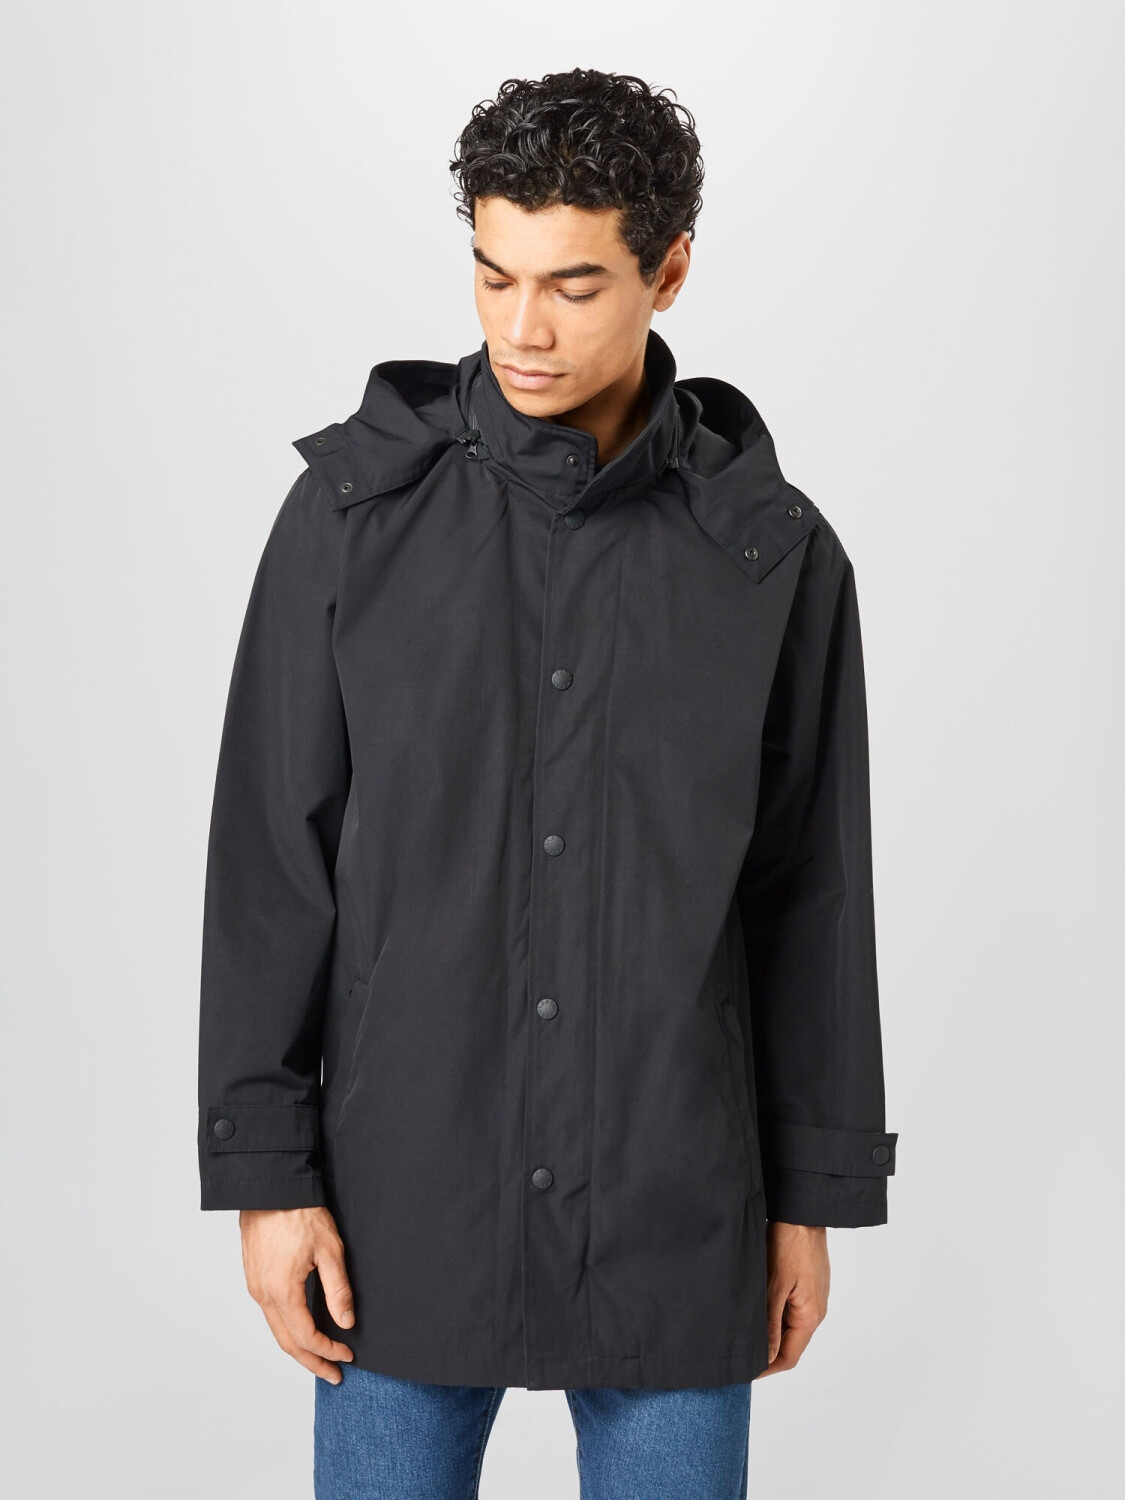 Buy Levi's Mission Fishtail Parka caviar (28412-0006) from £78.99 ...